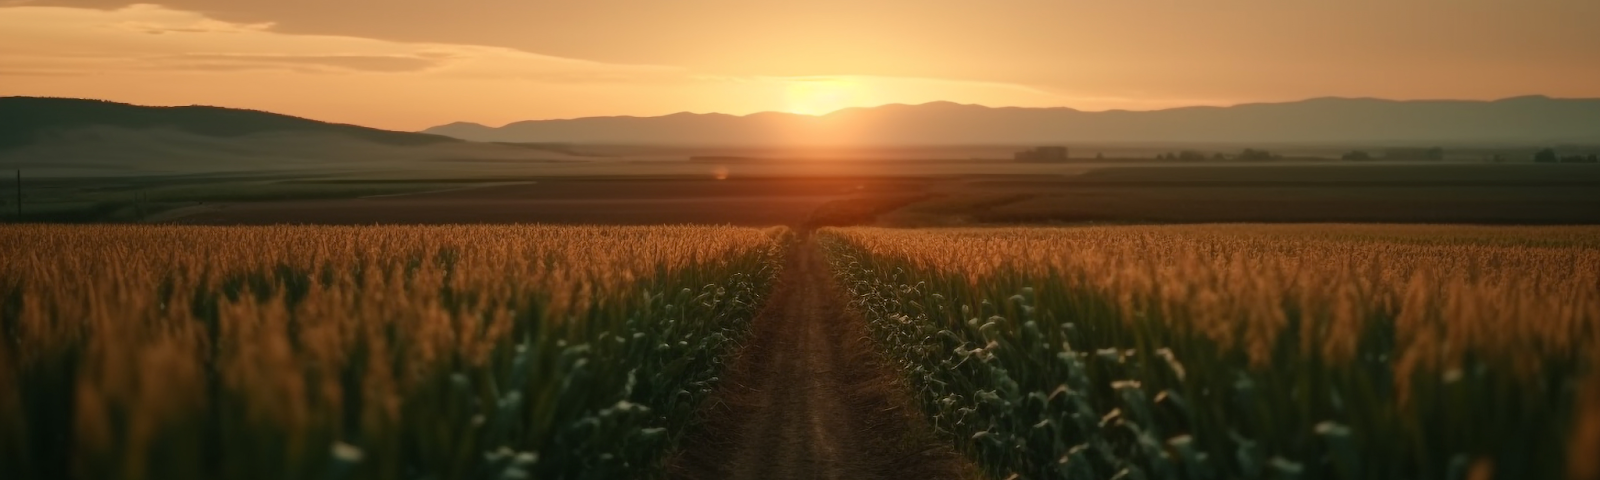 an AI generate image of a field with a dirt path on it running through the middle. there are crops like corn on the side and you can see mountains and the sun setting in the distance.